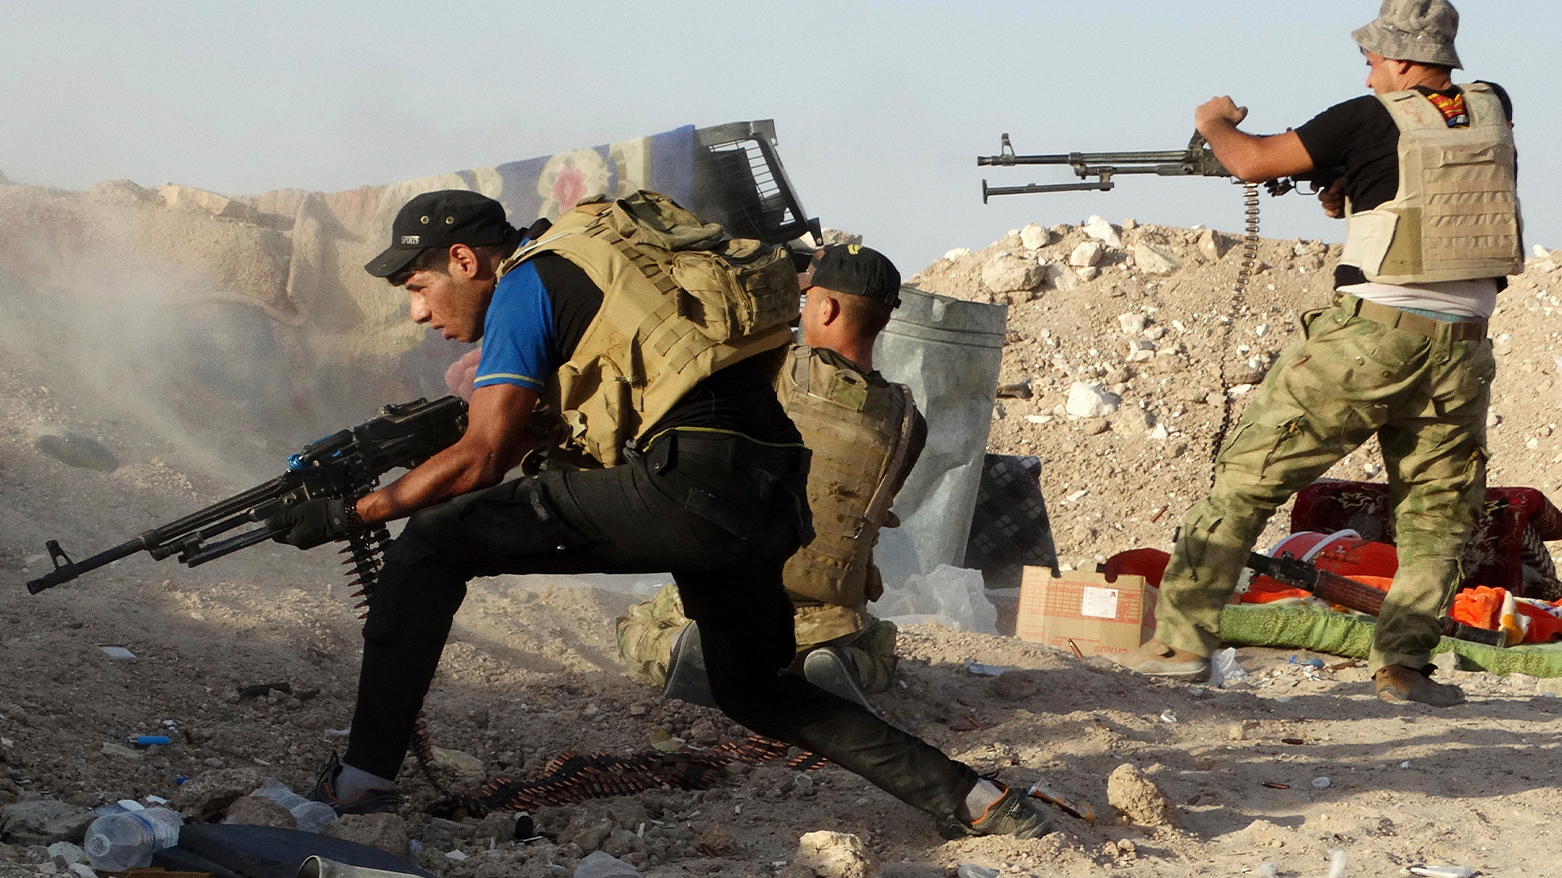 June 15, 2015, Iraqi security forces defend their positions against an Islamic State group attack in Husaybah, 8 kilometers (5 miles) east of Ramadi, Iraq. (AP Photo, File)